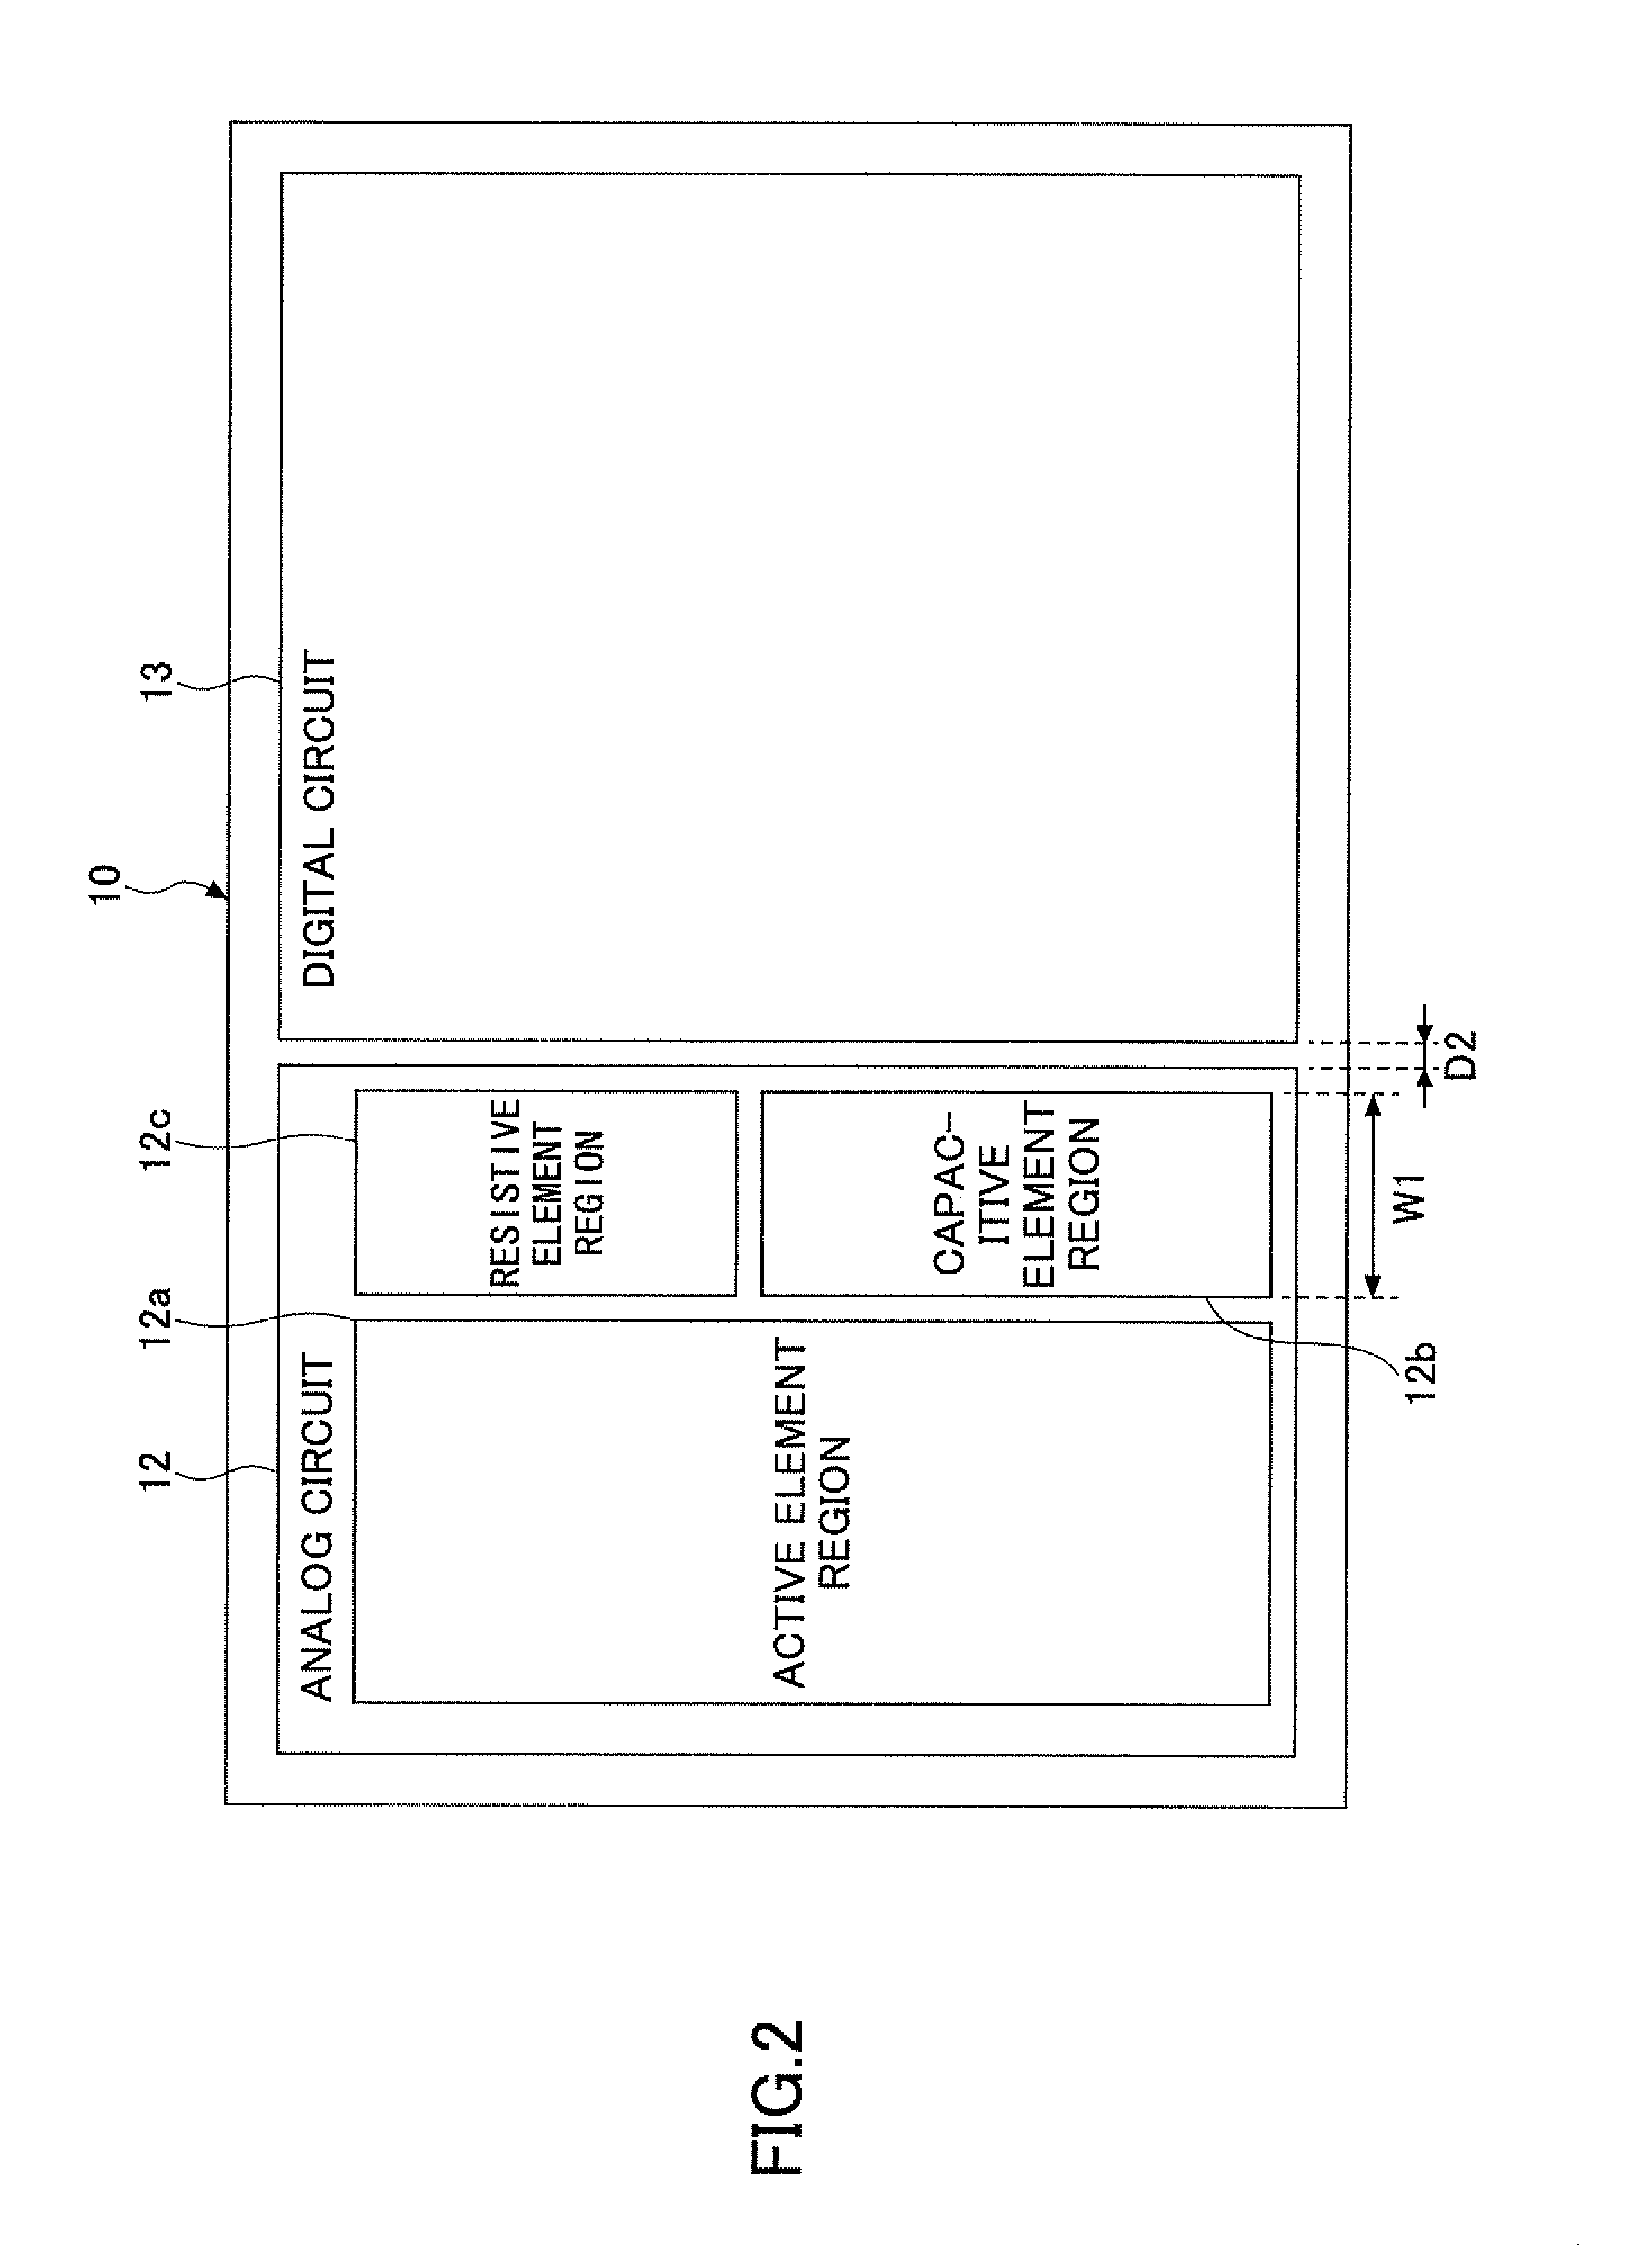 Semiconductor integrated circuit device having analog circuit separated from digital circuit using resistive and capacitive element regions